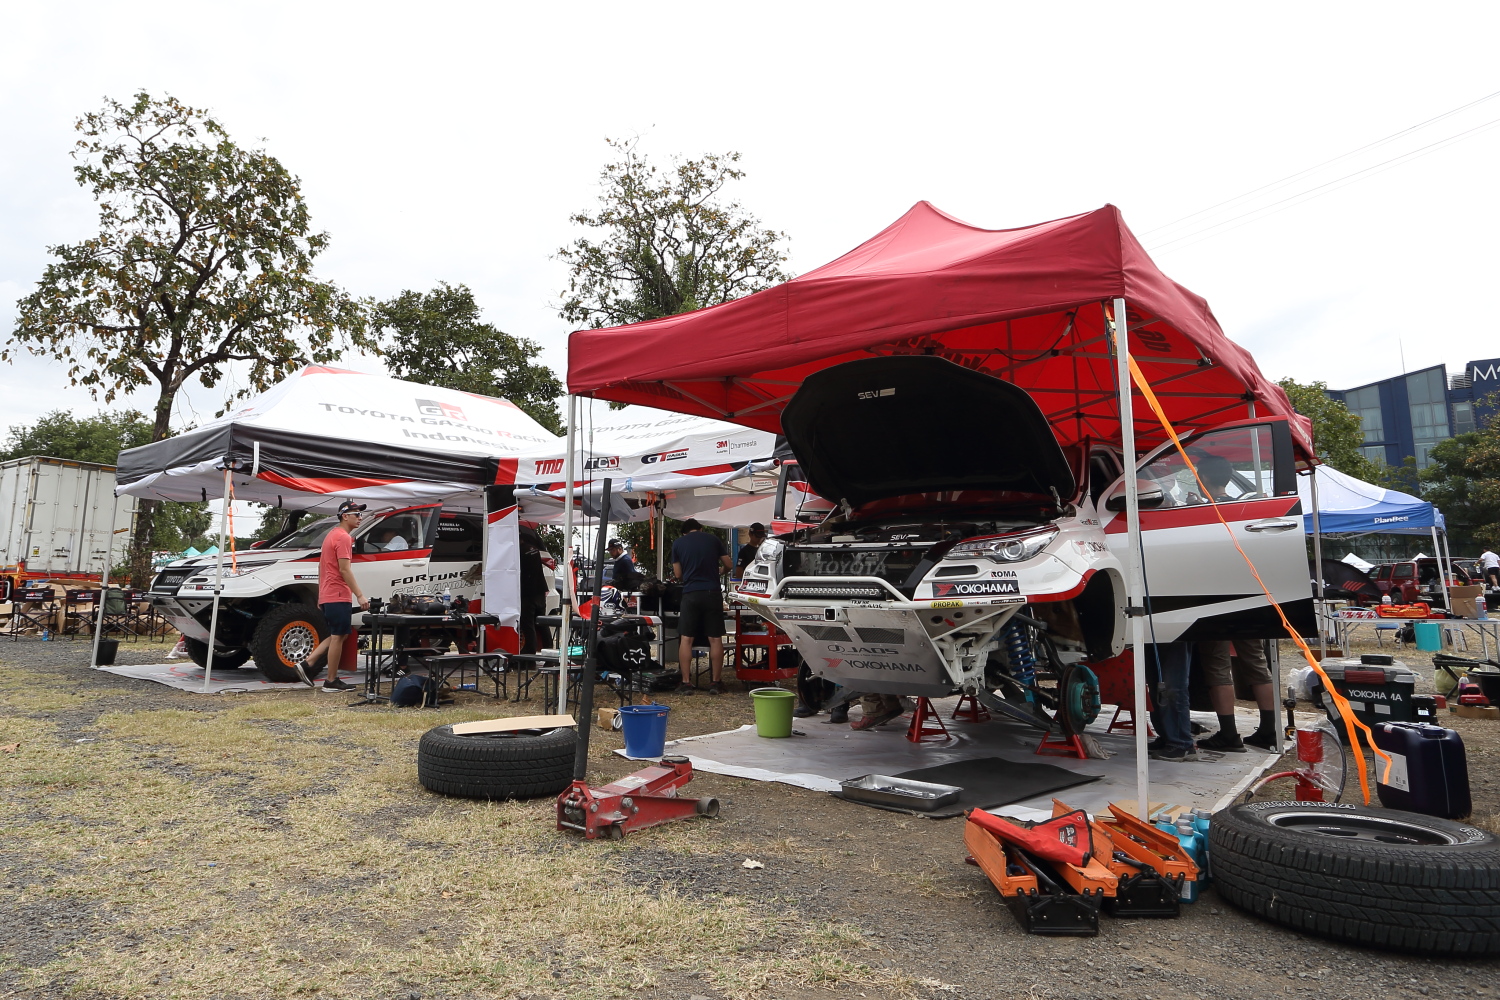 State of the pit area